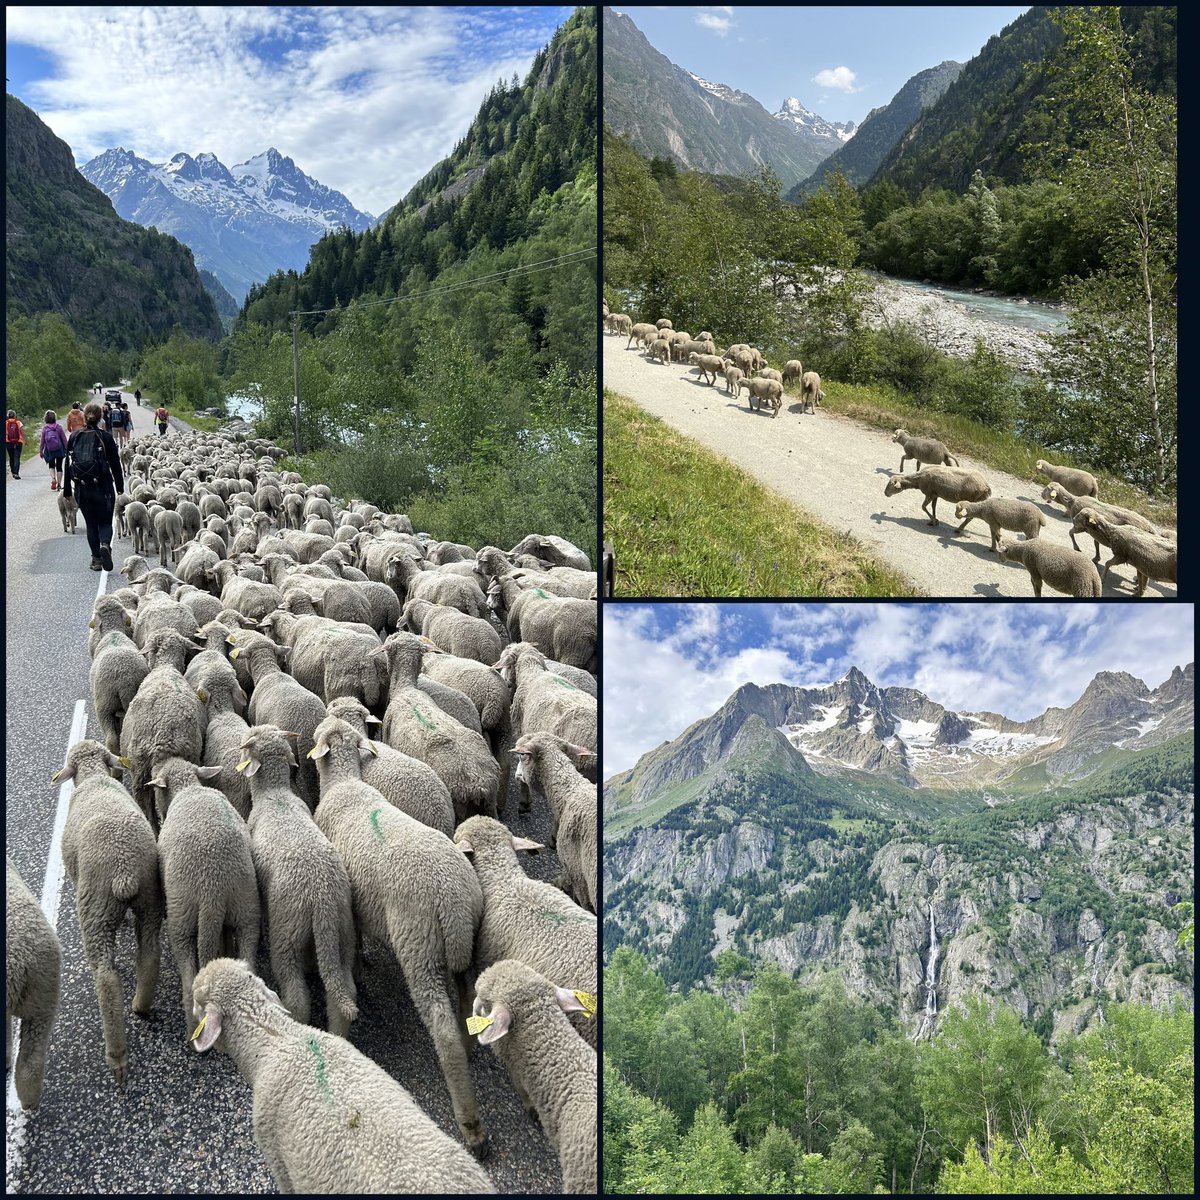 Spent the weekend sheep herding in the French Alps. Wasn’t on my bucket list, but should have been.